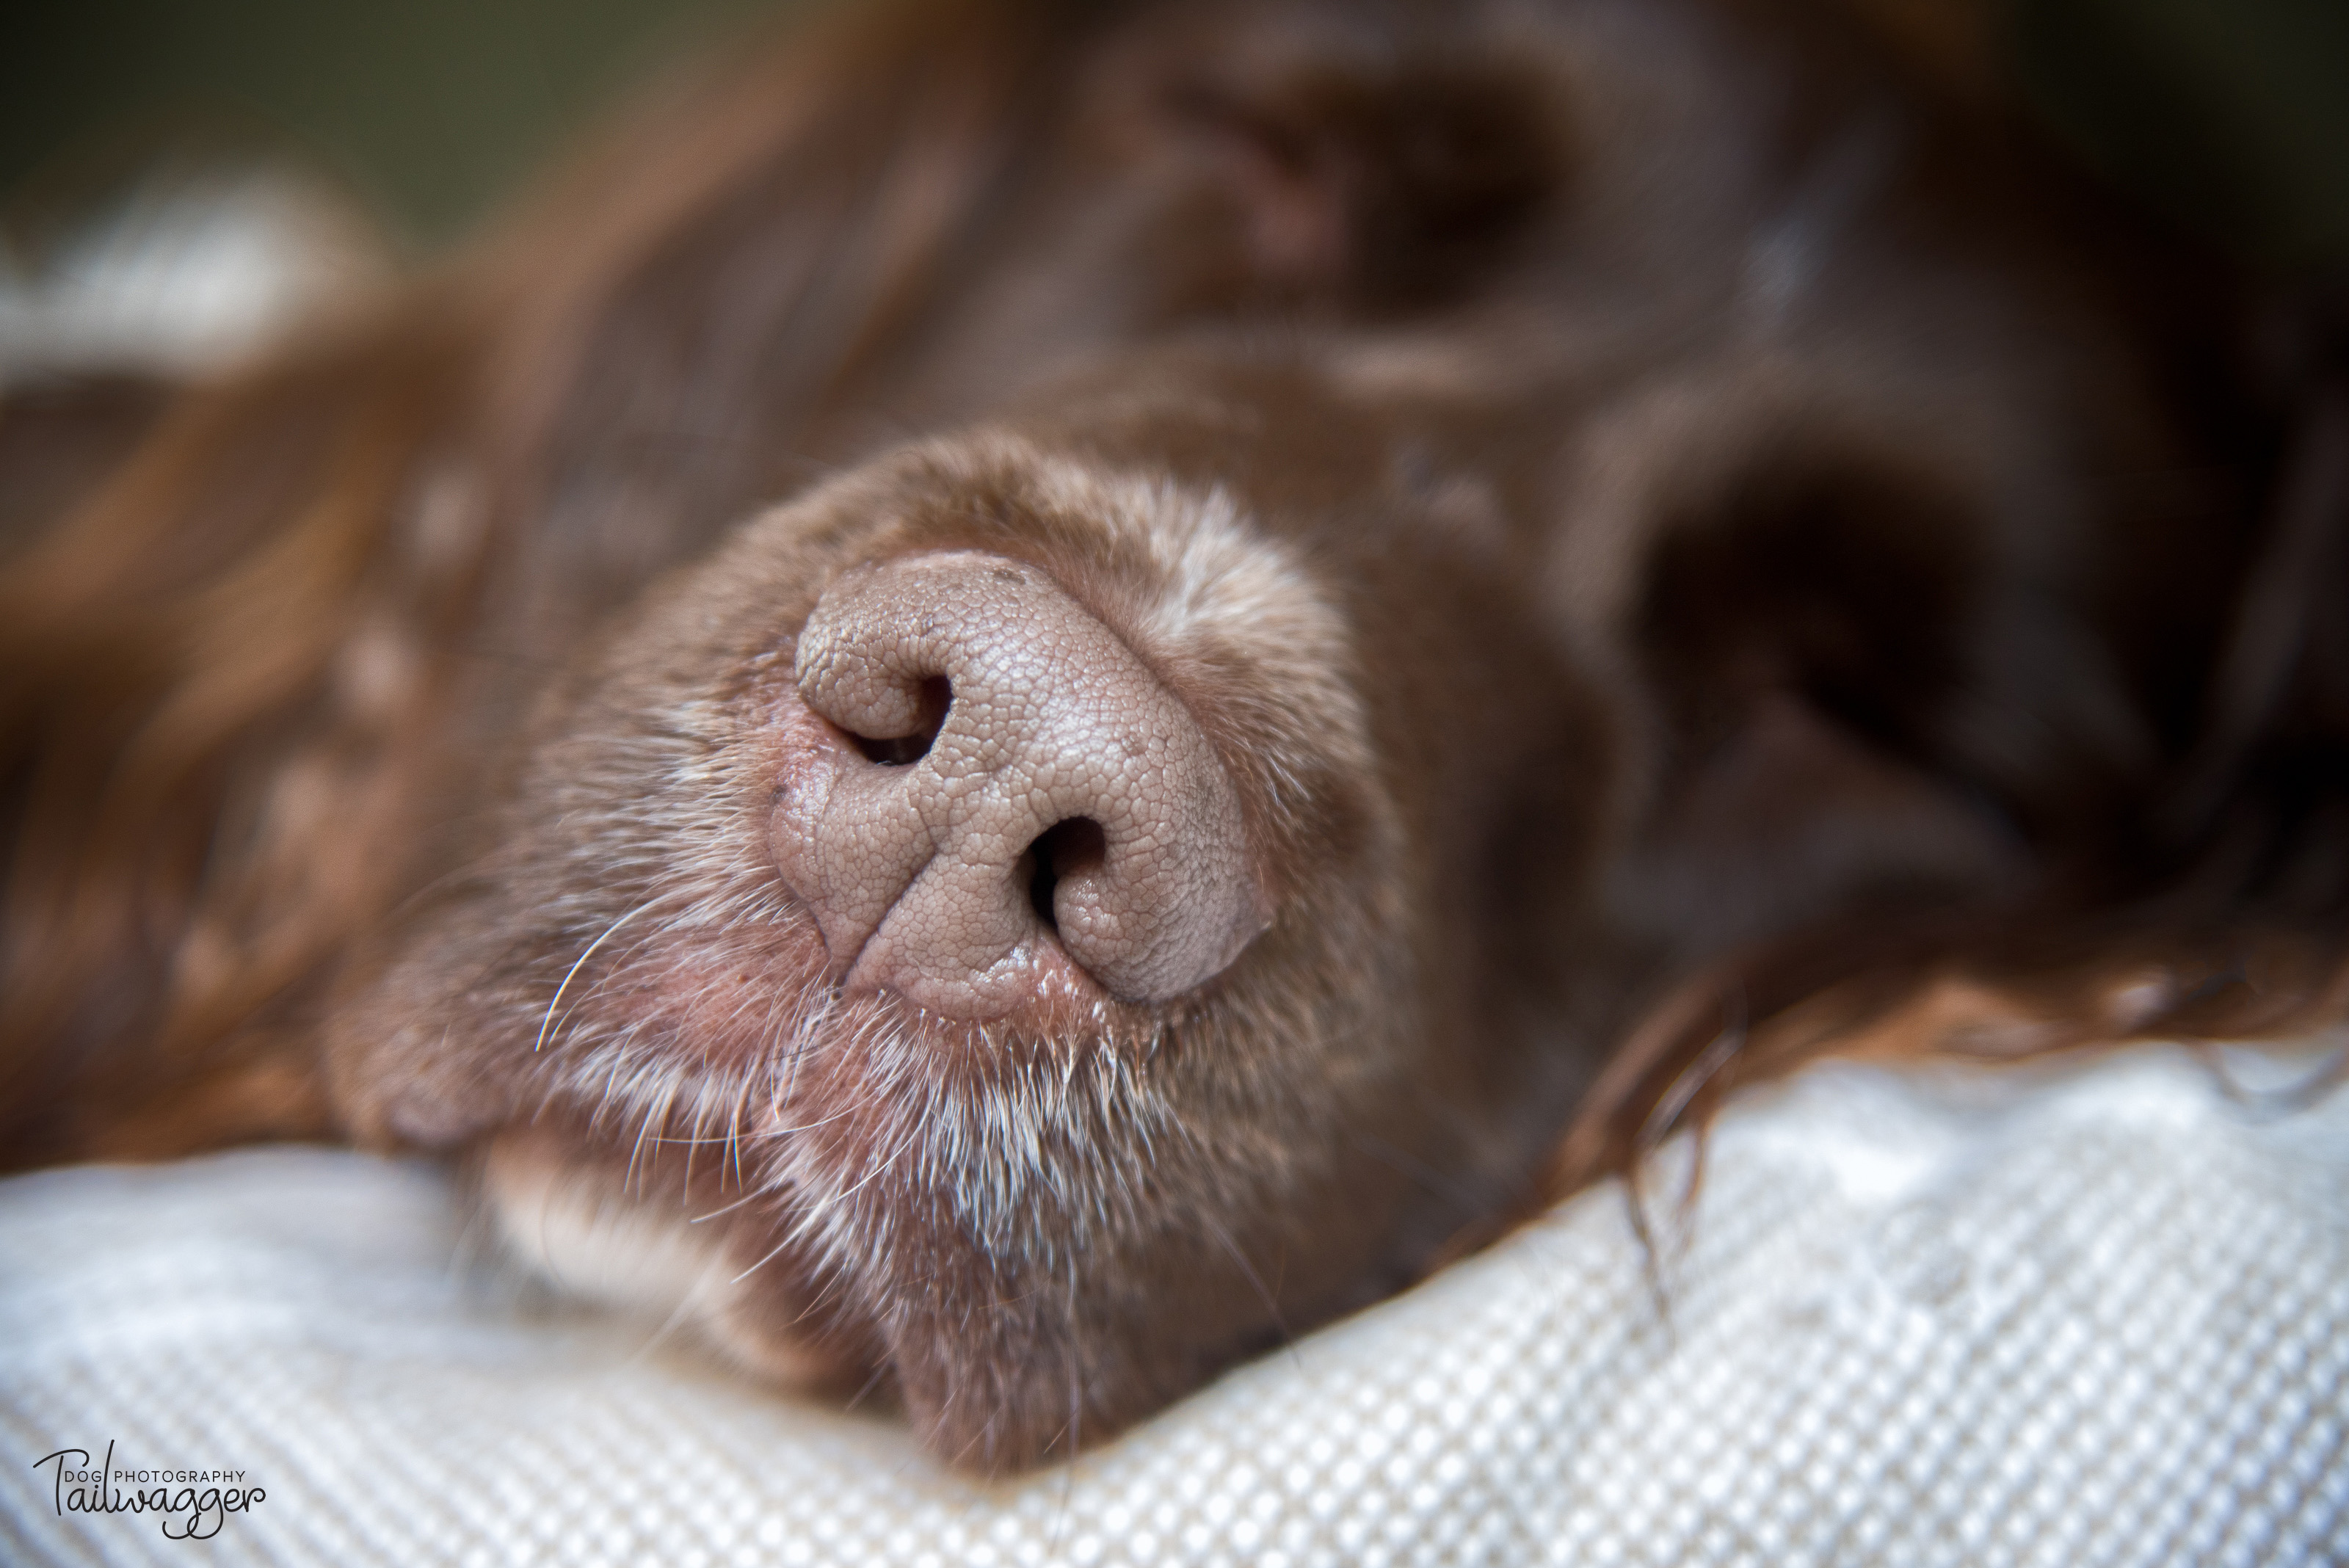 Nose of a sleeping English Springer Spaniel lying on a bed